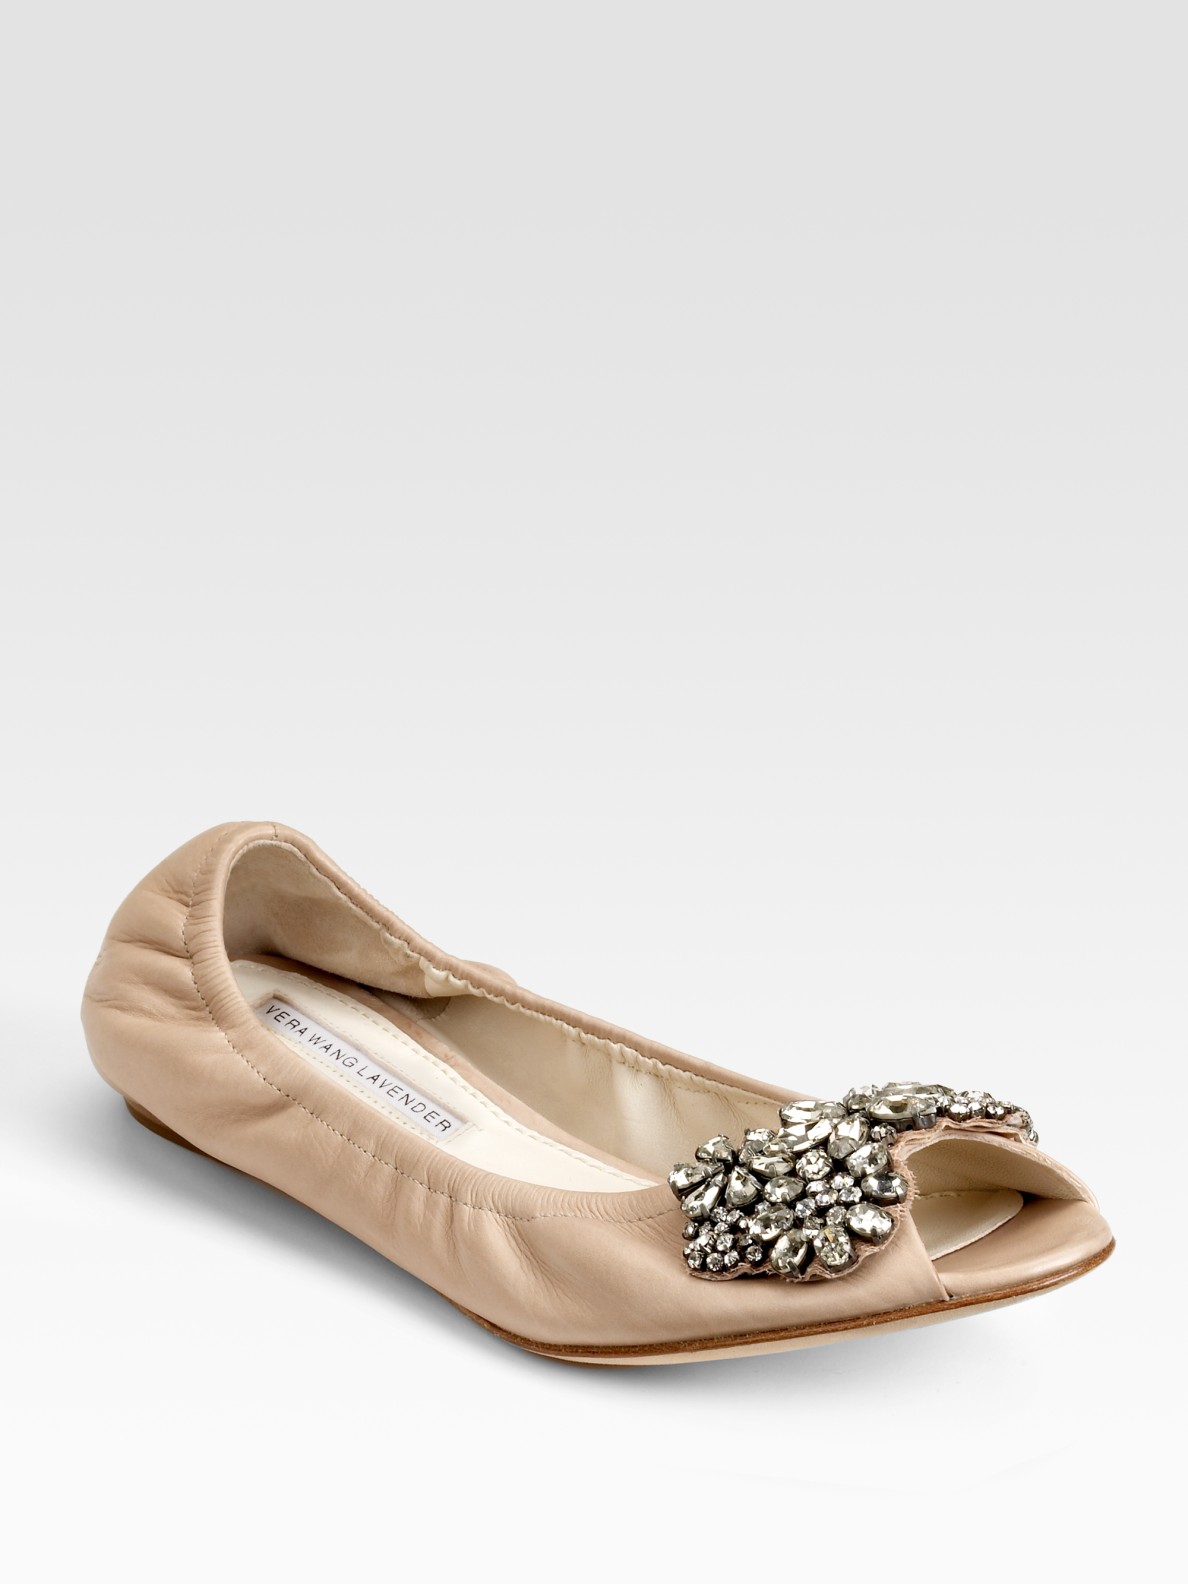 Vera Wang Lavender Jeweled Open-toe Ballet Flats in Brown | Lyst